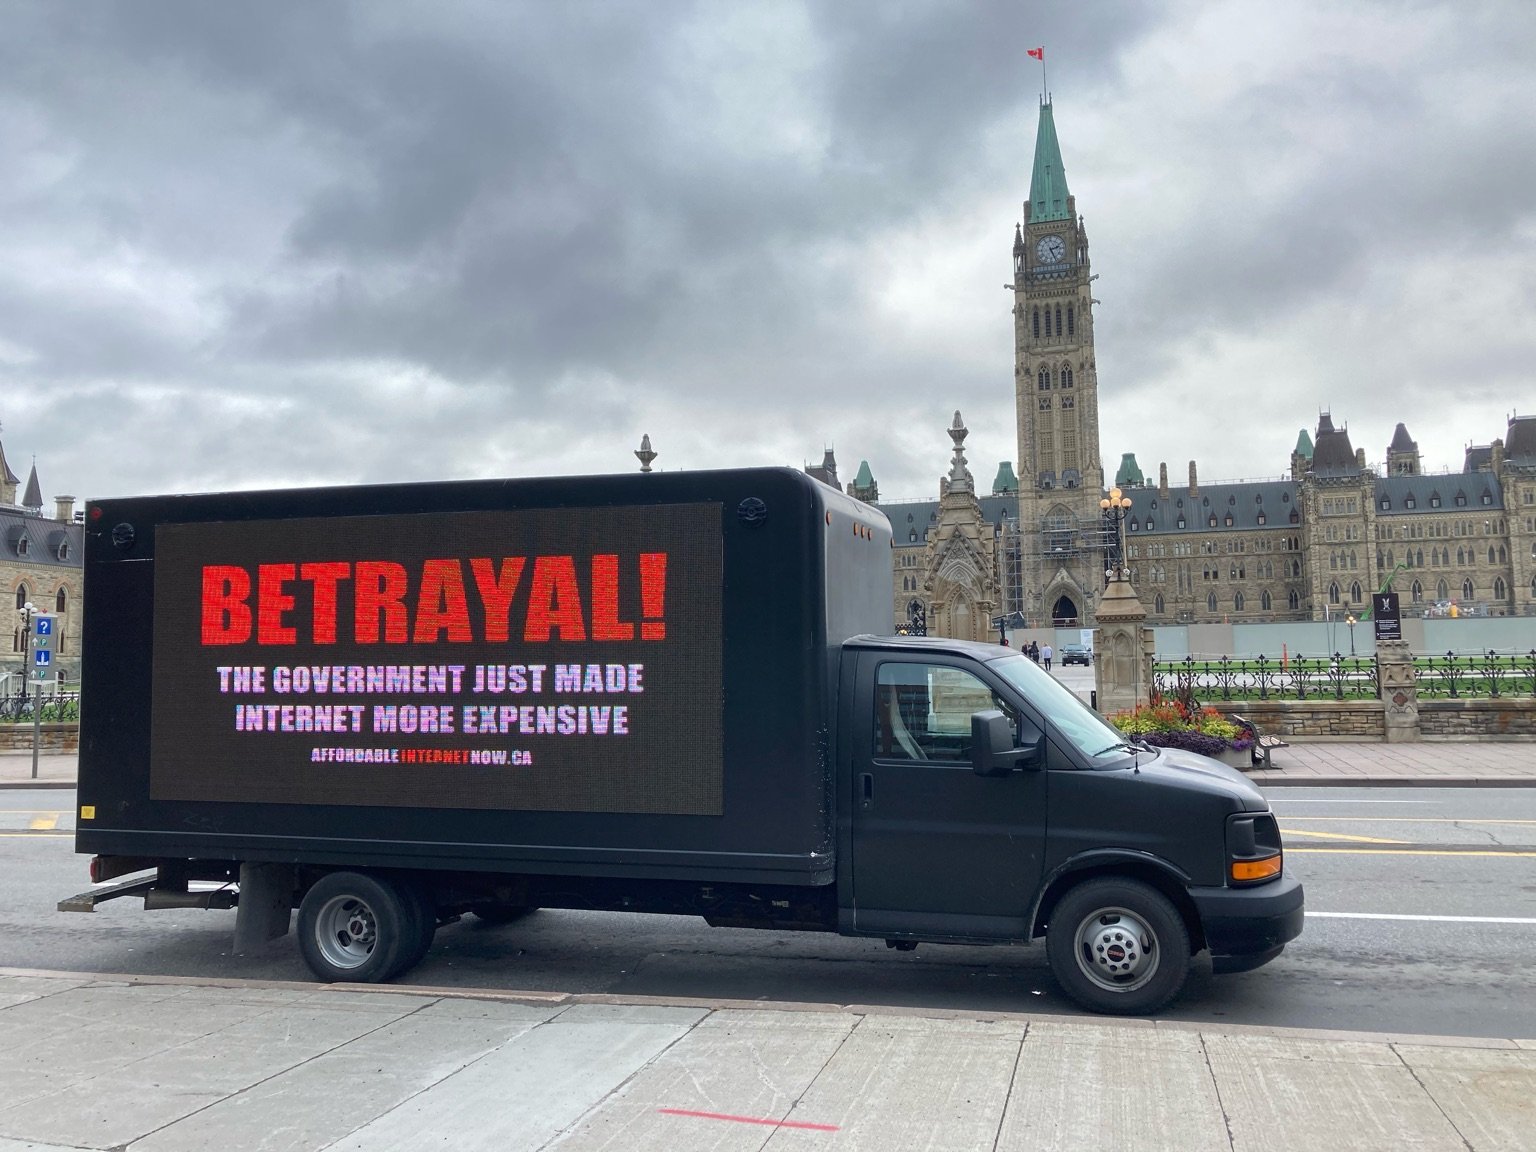 Truck with billboard: Betrayal! The government just made internet more expensive